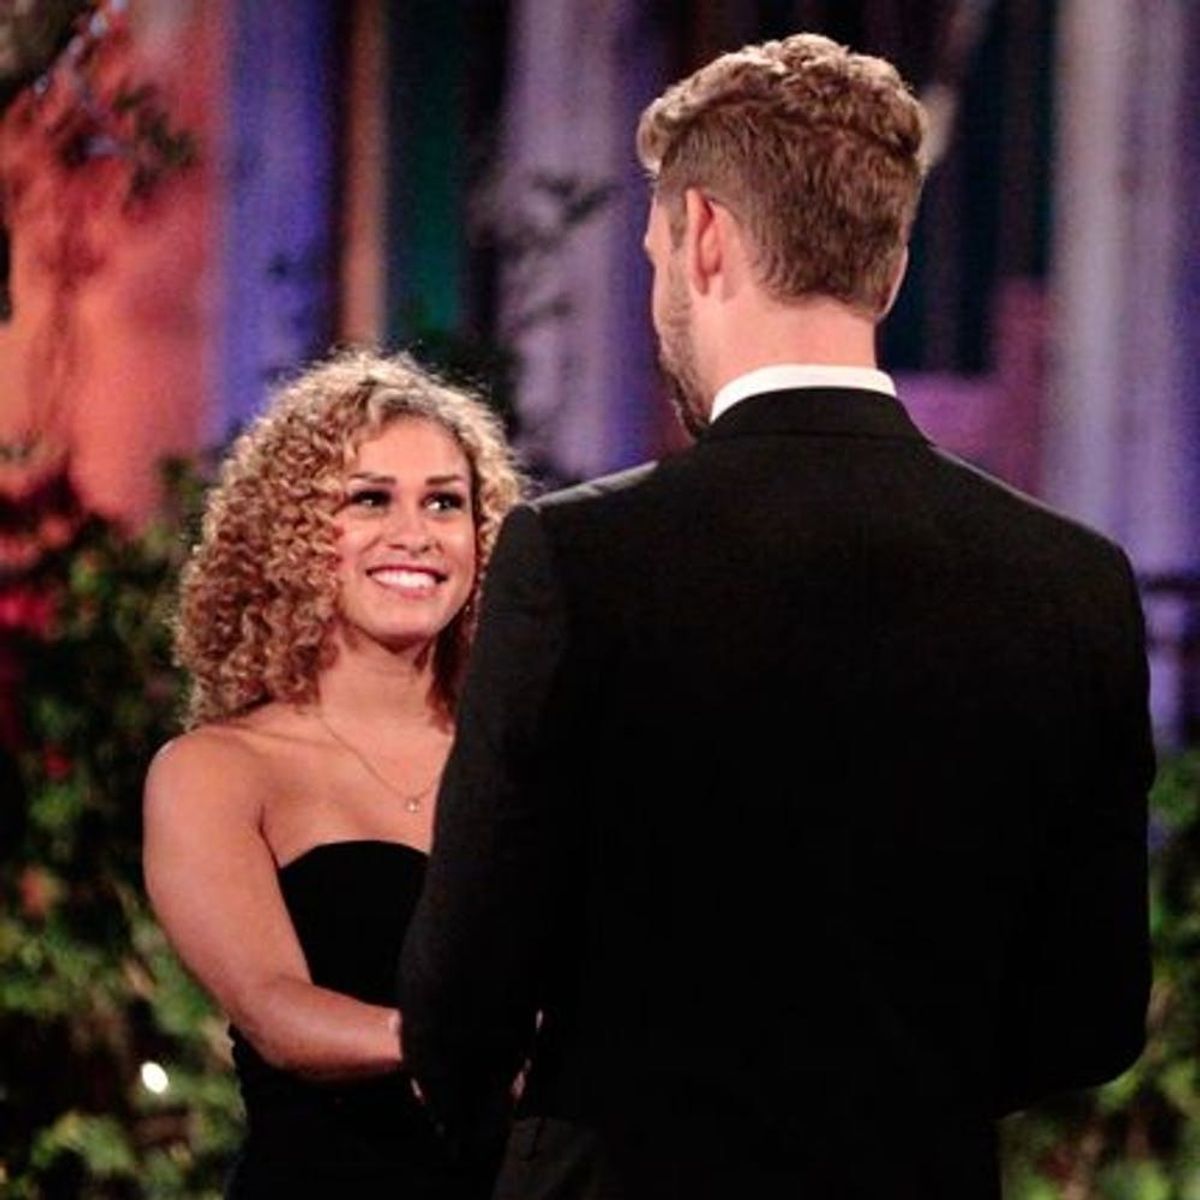 The Bachelor Has an Openly LGBTQ Contestant for the First Time